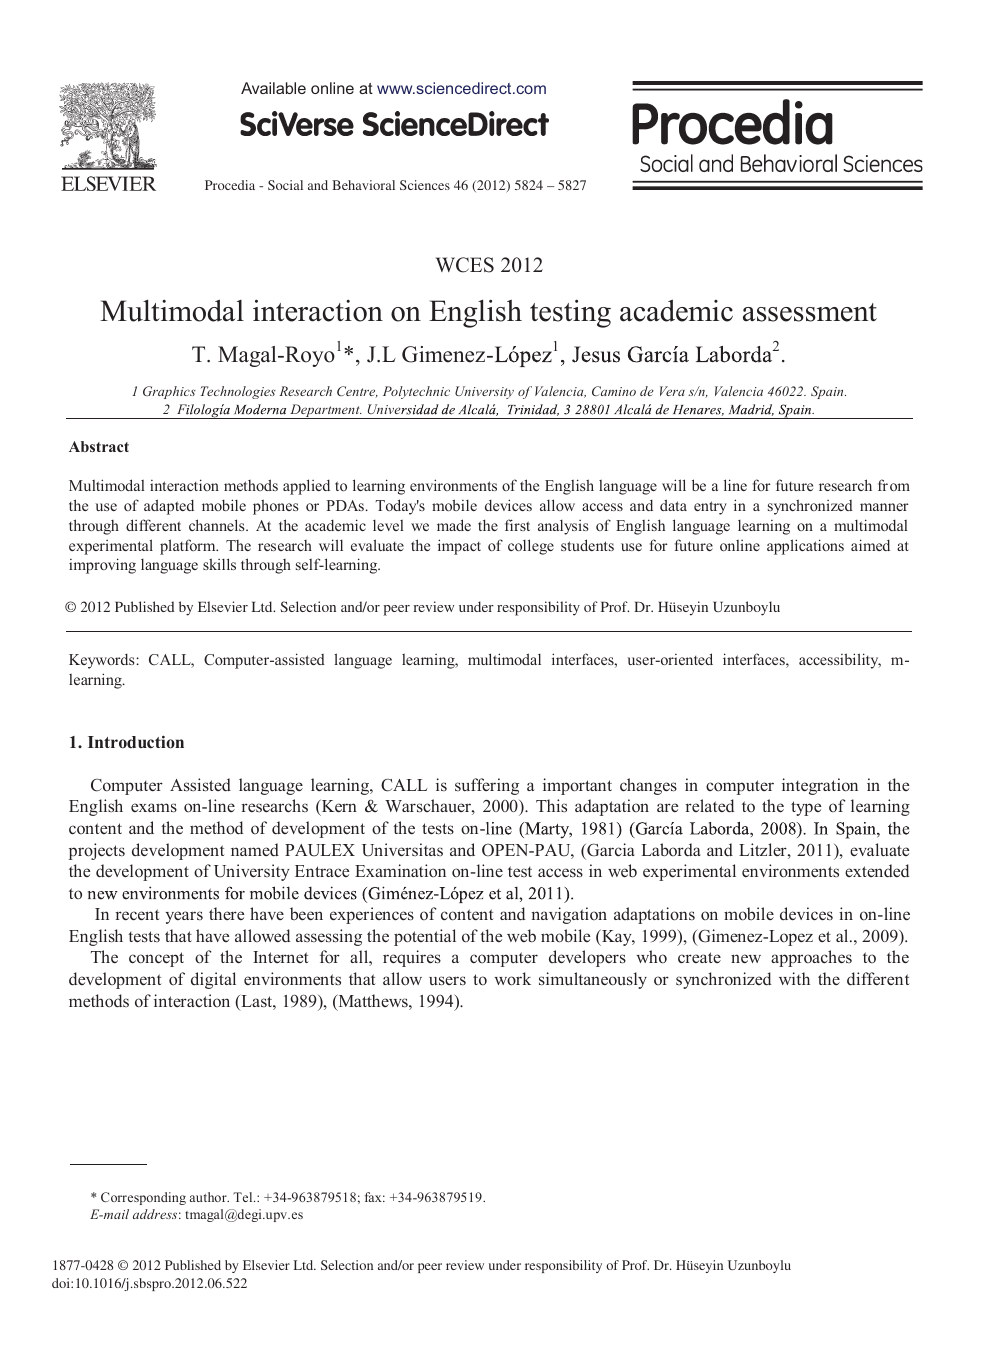 Multimodal Interaction On English Testing Academic Assessment Topic Of Research Paper In Computer And Information Sciences Download Scholarly Article Pdf And Read For Free On Cyberleninka Open Science Hub